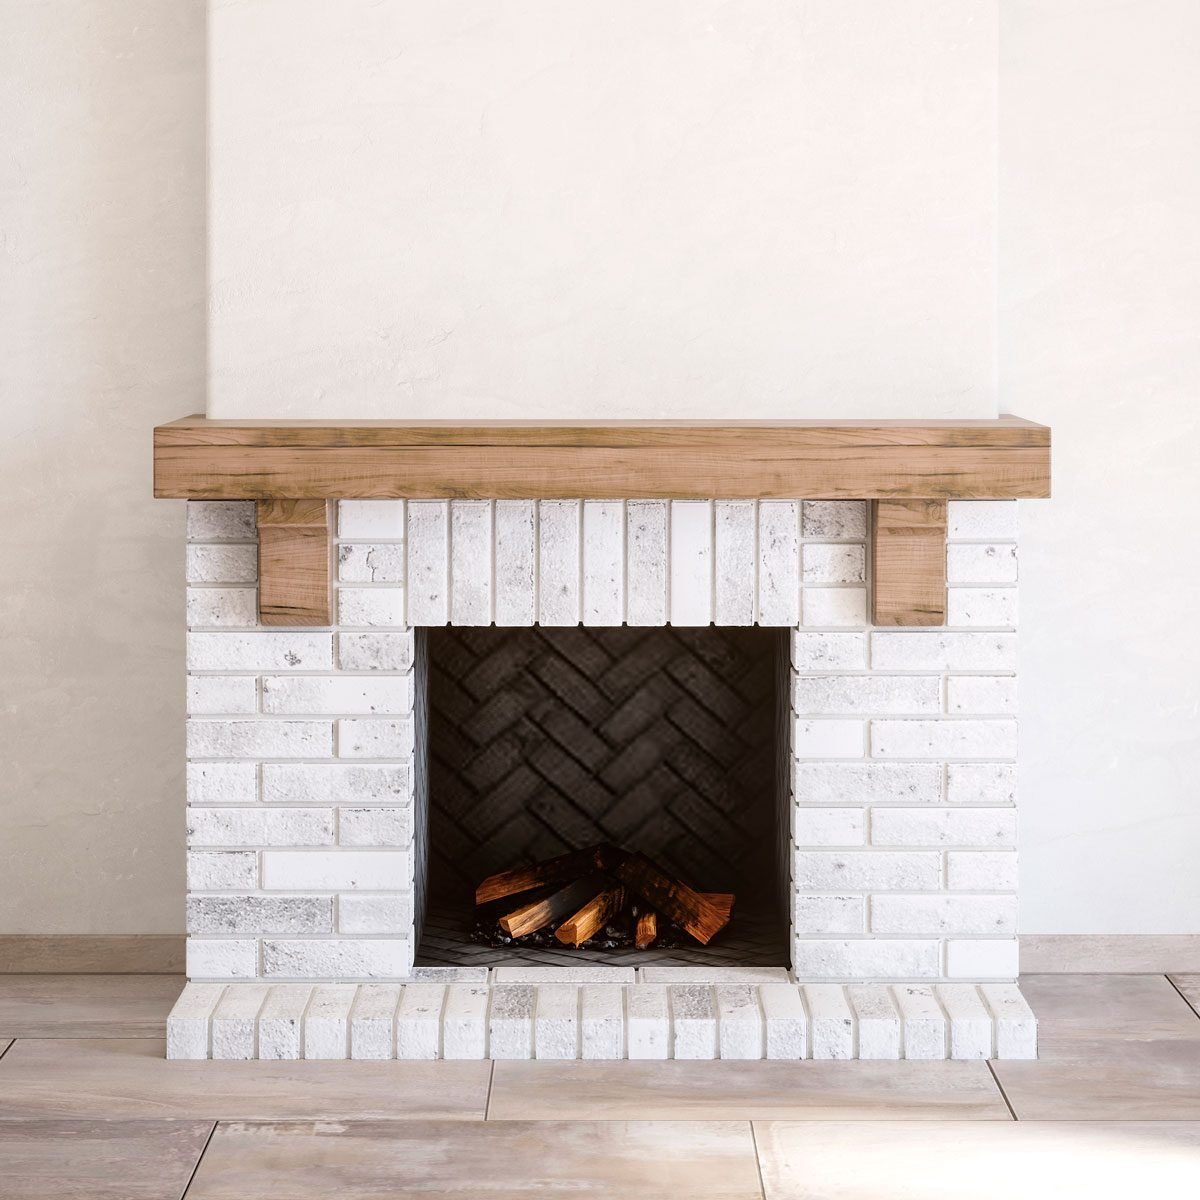 Does My Fireplace Need a Damper?